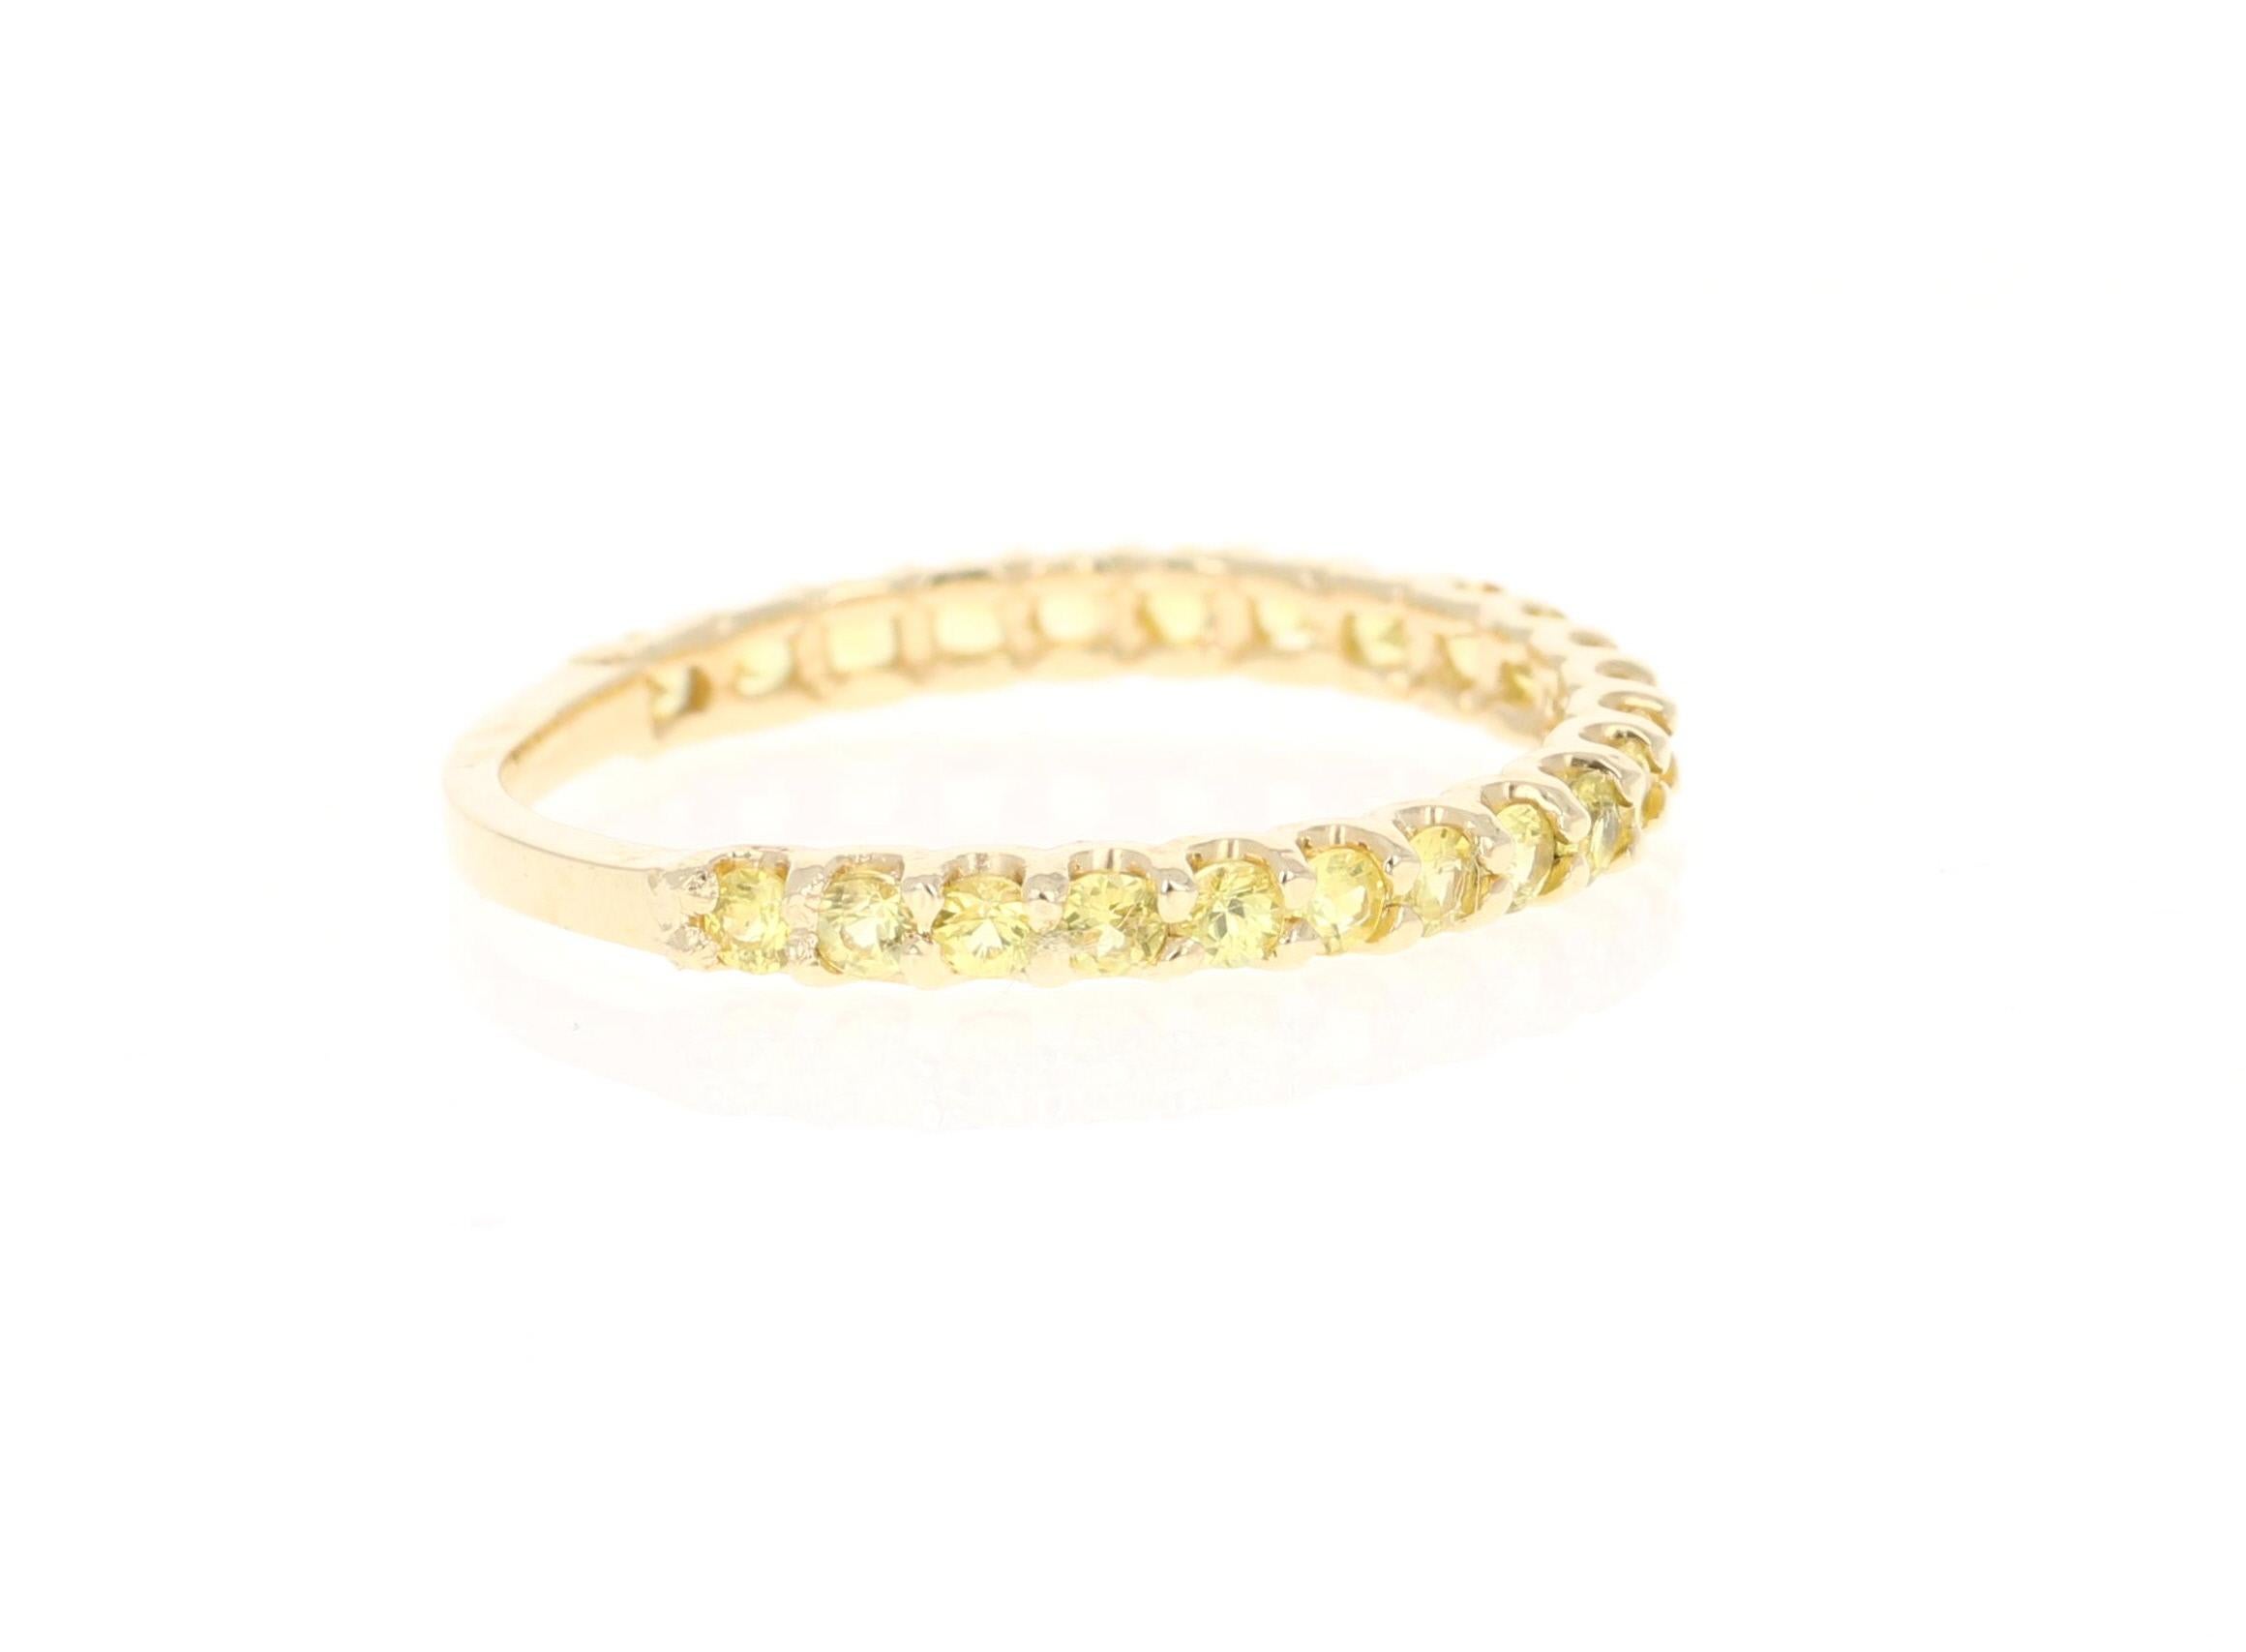 This ring has 23 Natural Round Cut Yellow Sapphires that weigh 0.75 Carats. 

Crafted in 14 Karat Yellow Gold and weighs approximately 1.3 grams 

The ring is a size 7 and can be re-sized at no additional charge!